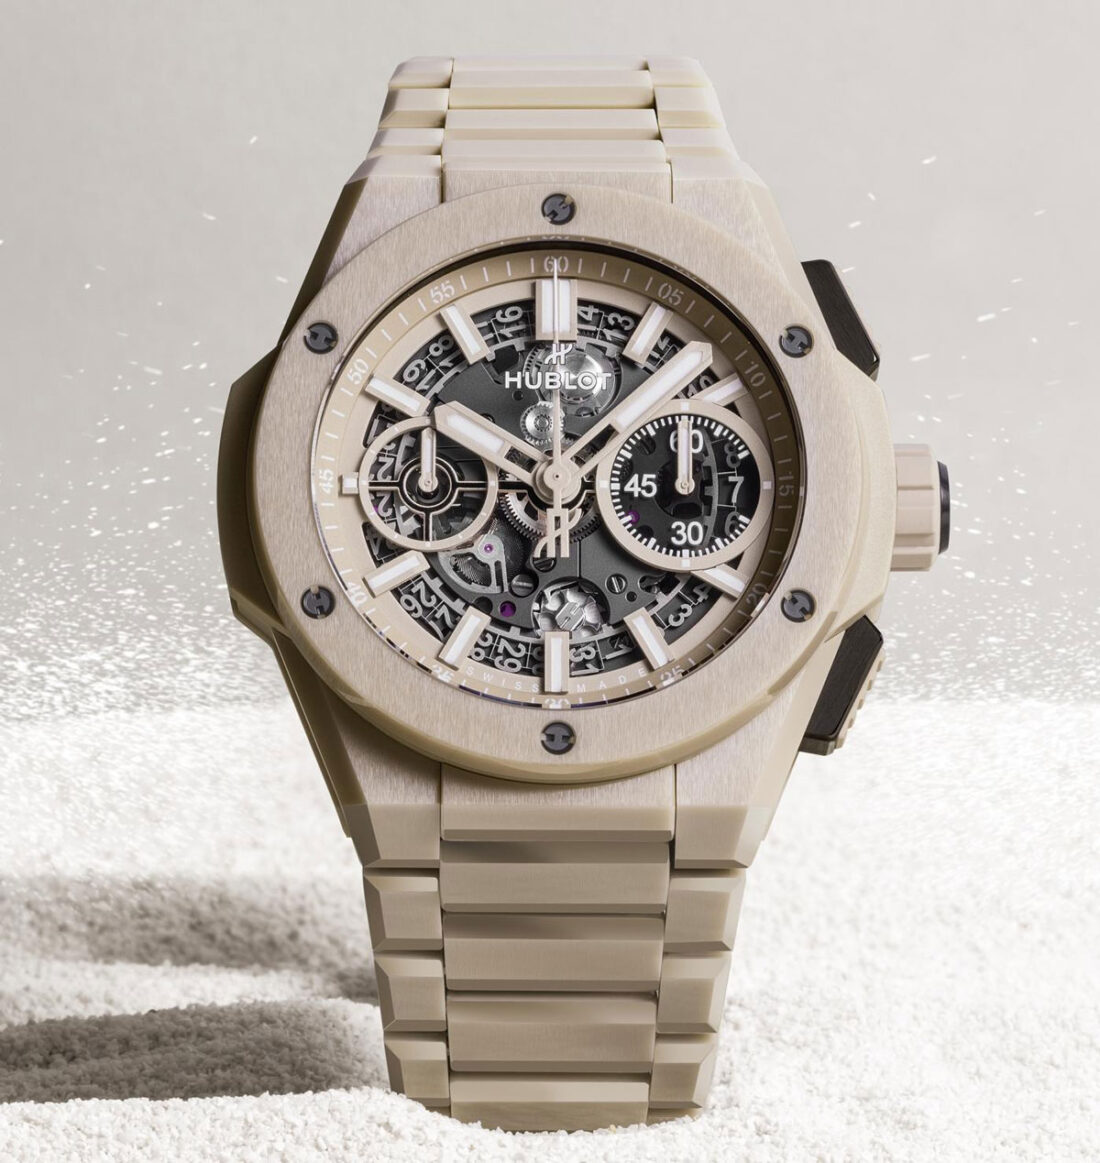 Introducing: Hublot Square Bang. Five New Watches Reminiscent of